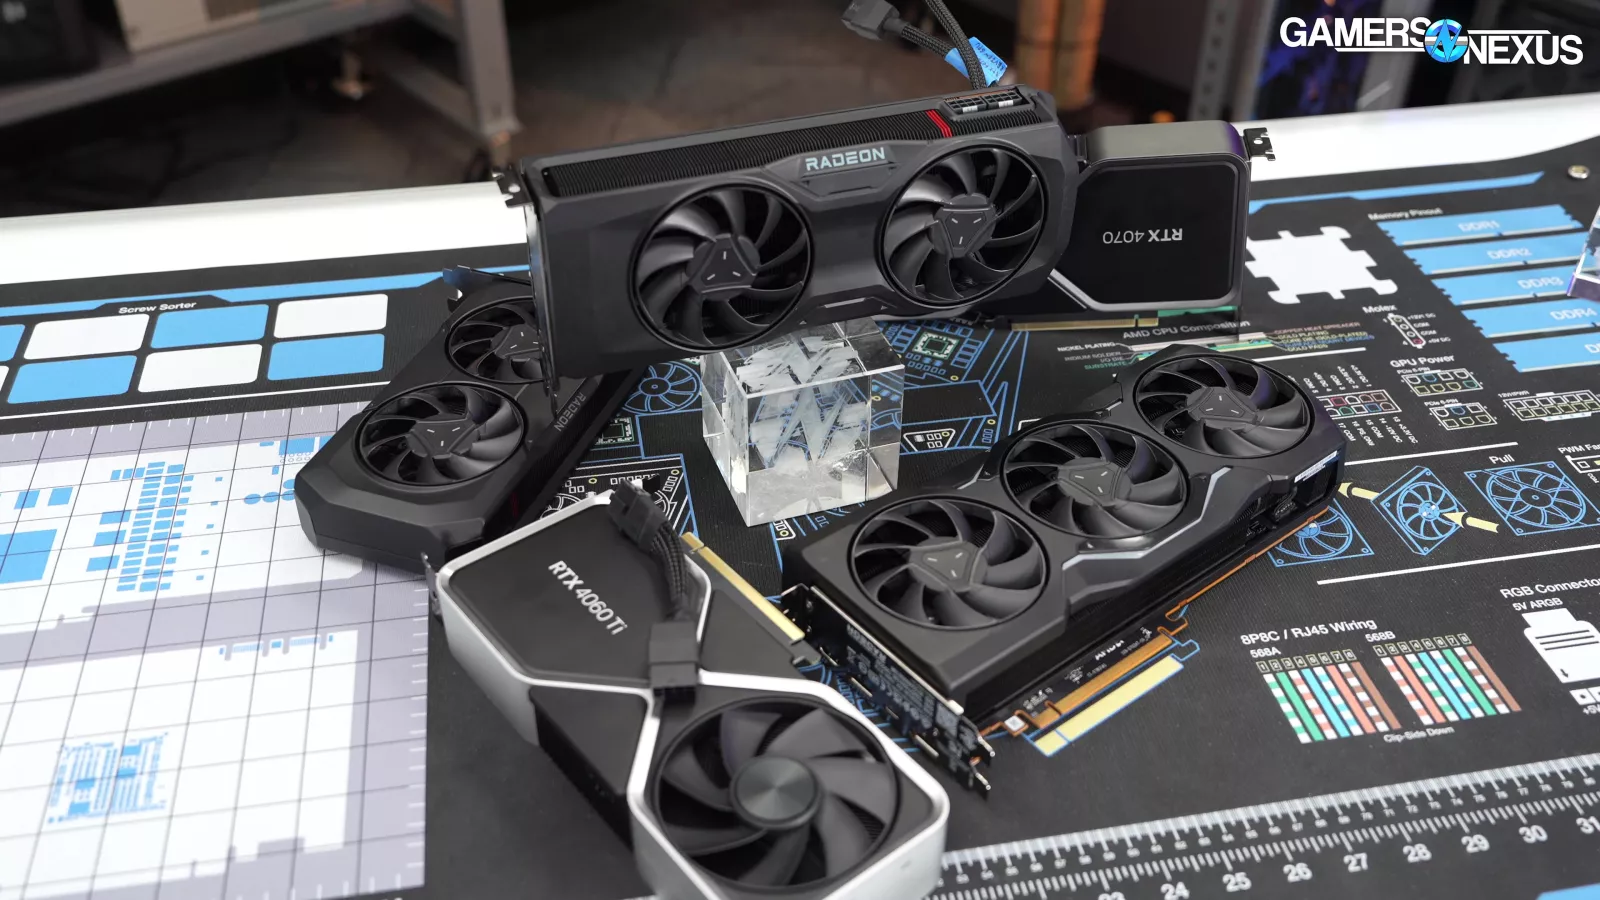 This was the most disappointing GPU that I reviewed this year